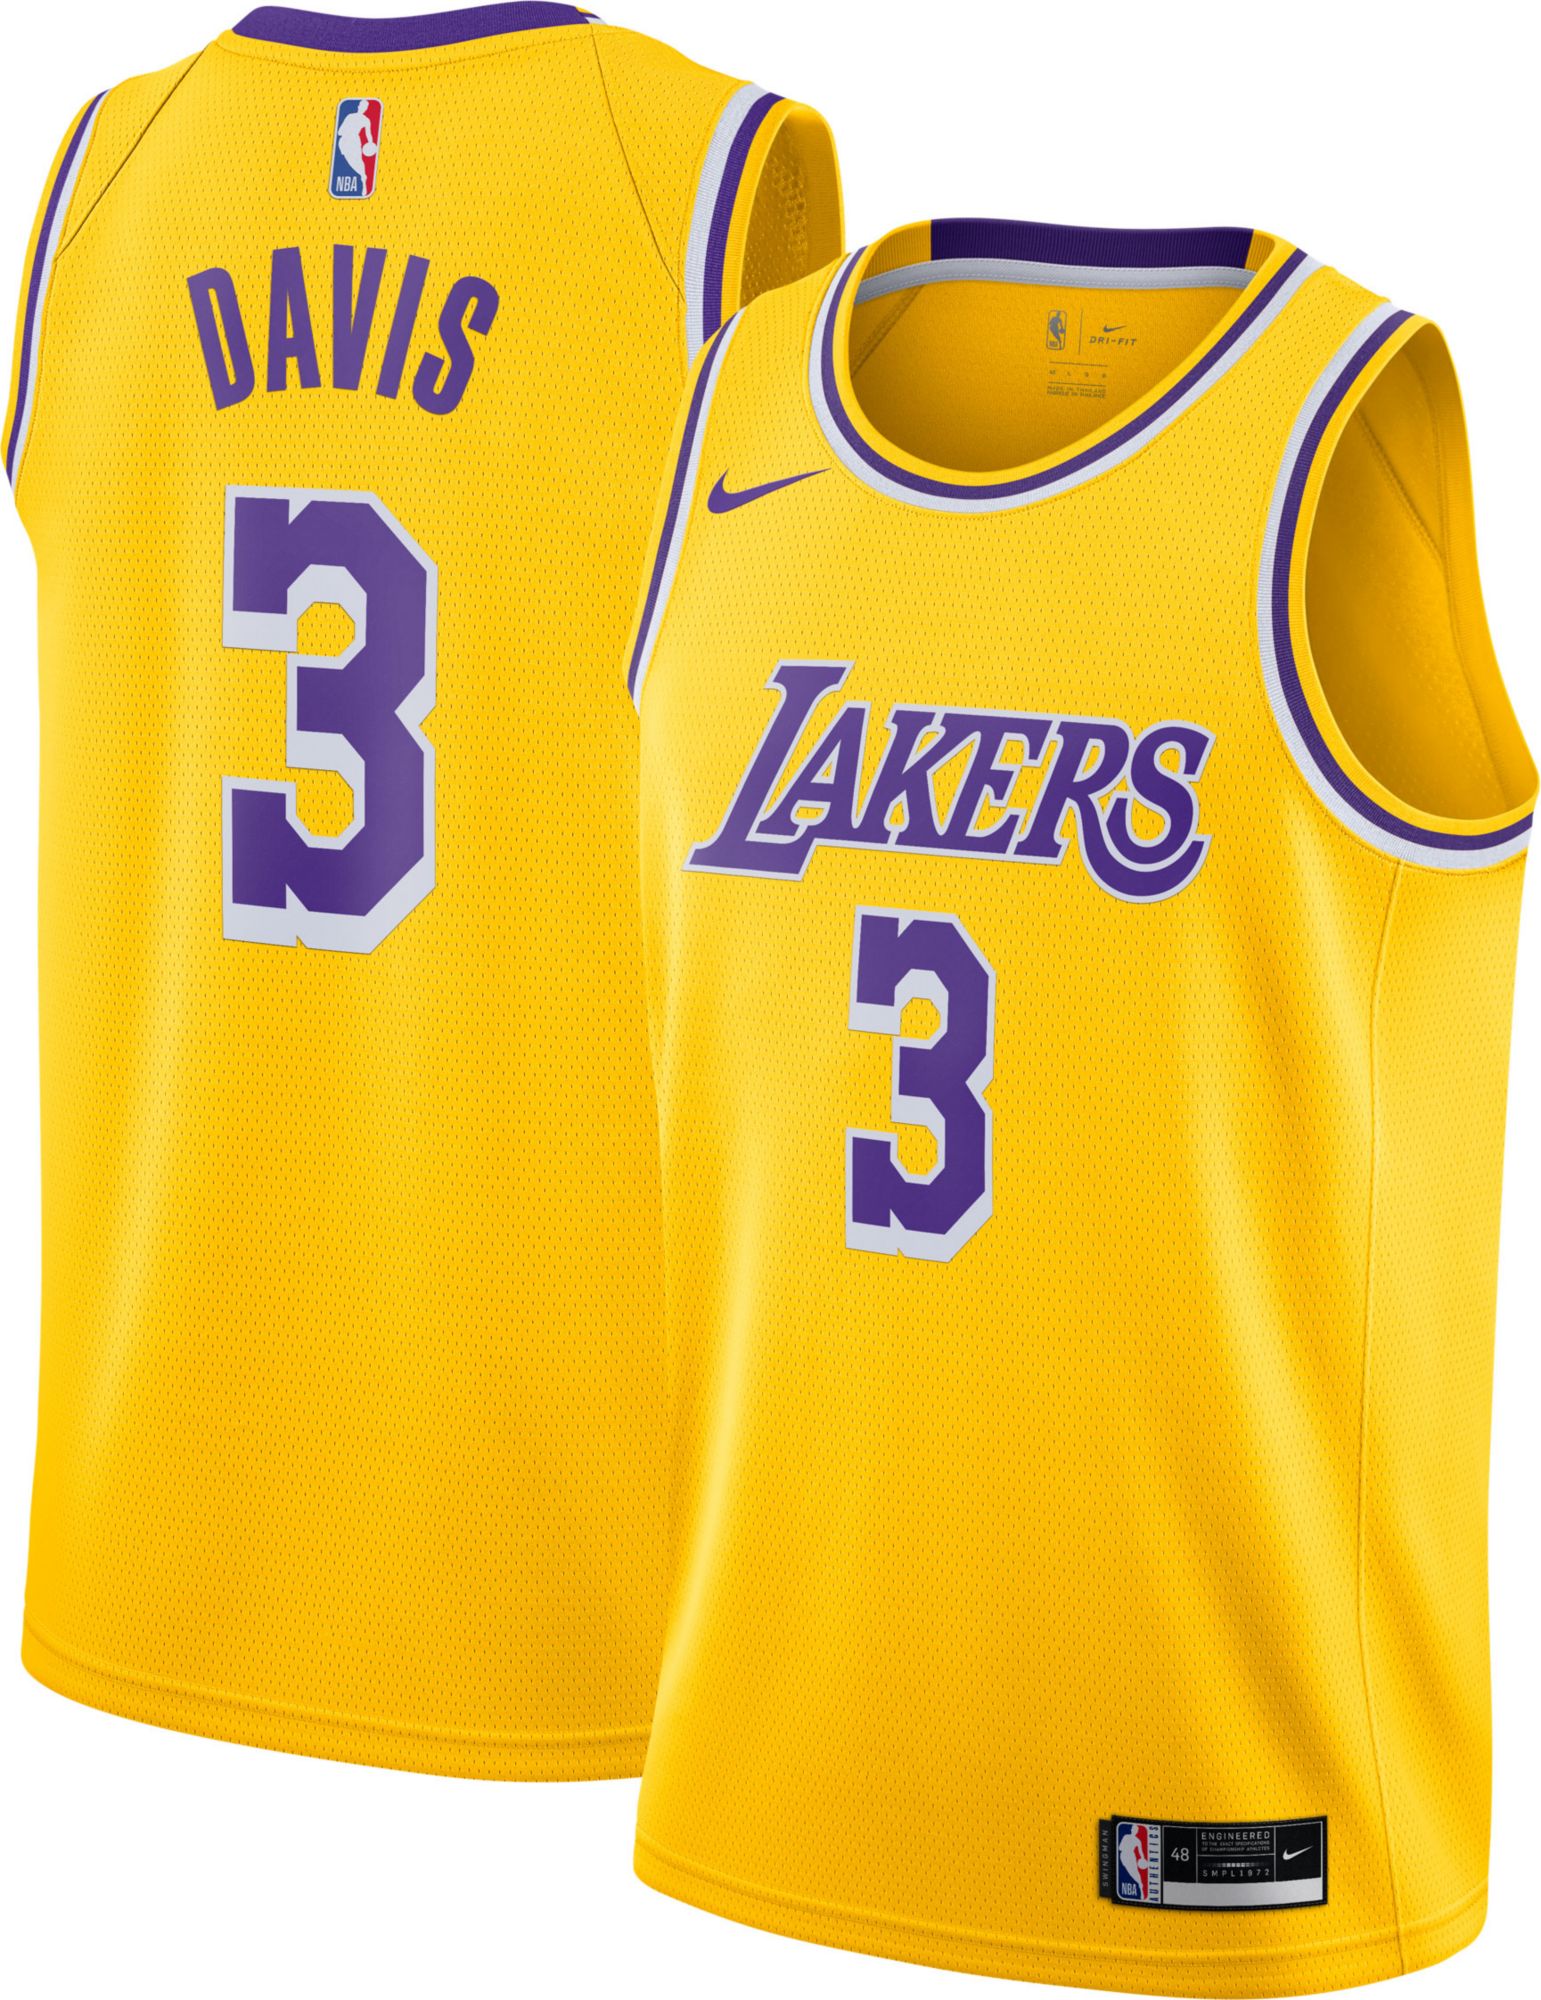 Tobais Harris Jerseys & Gear  Curbside Pickup Available at DICK'S